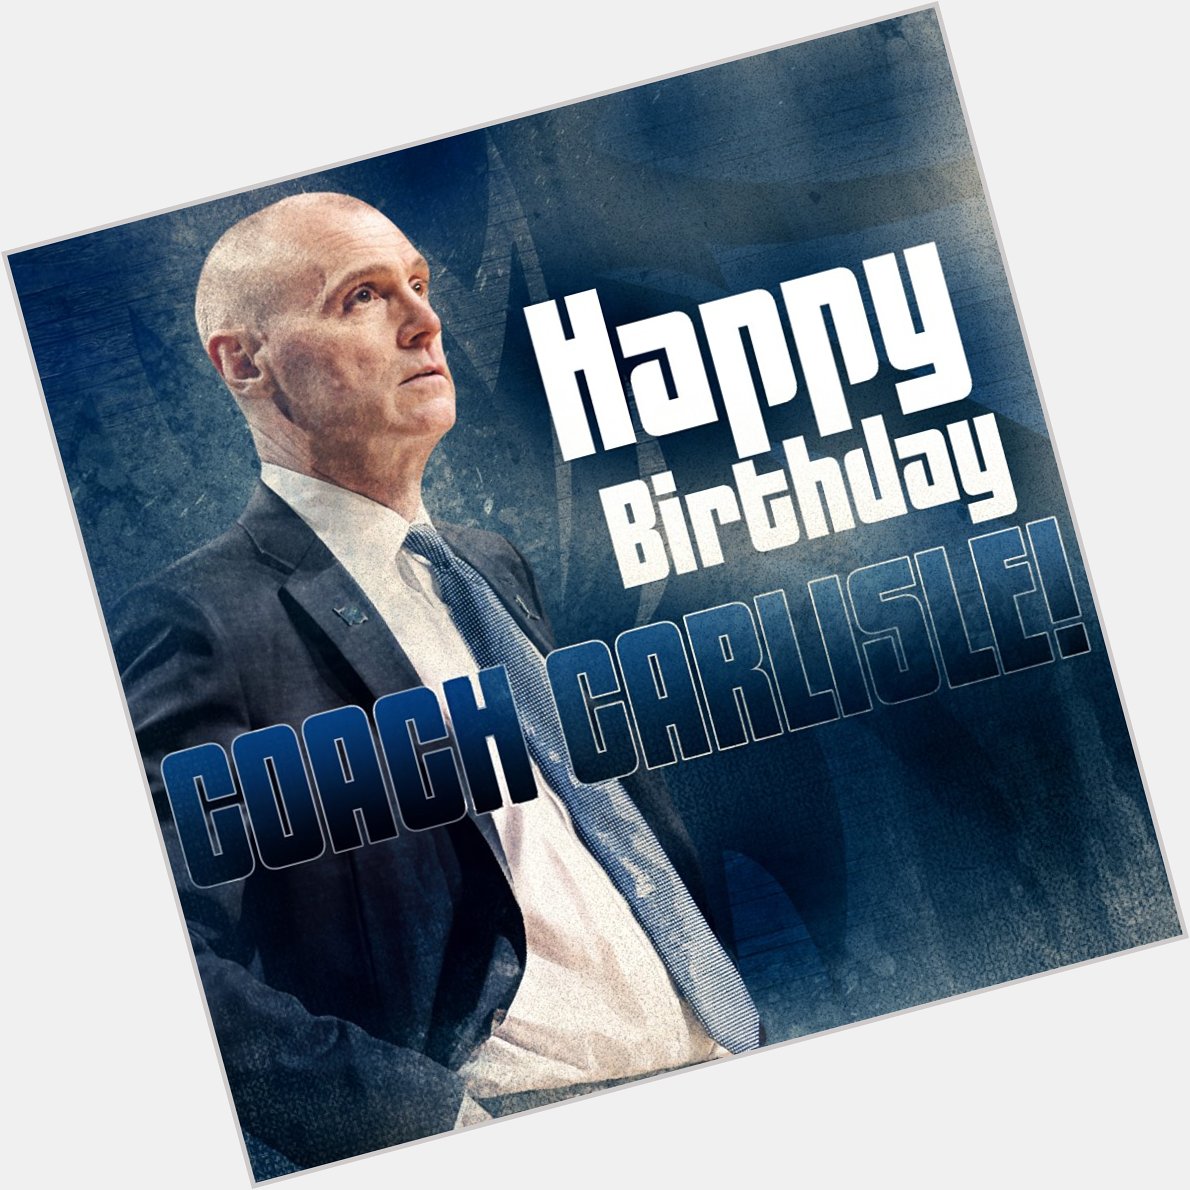 Everyone join us in wishing Head Coach Rick Carlisle a very special Happy Birthday today!  